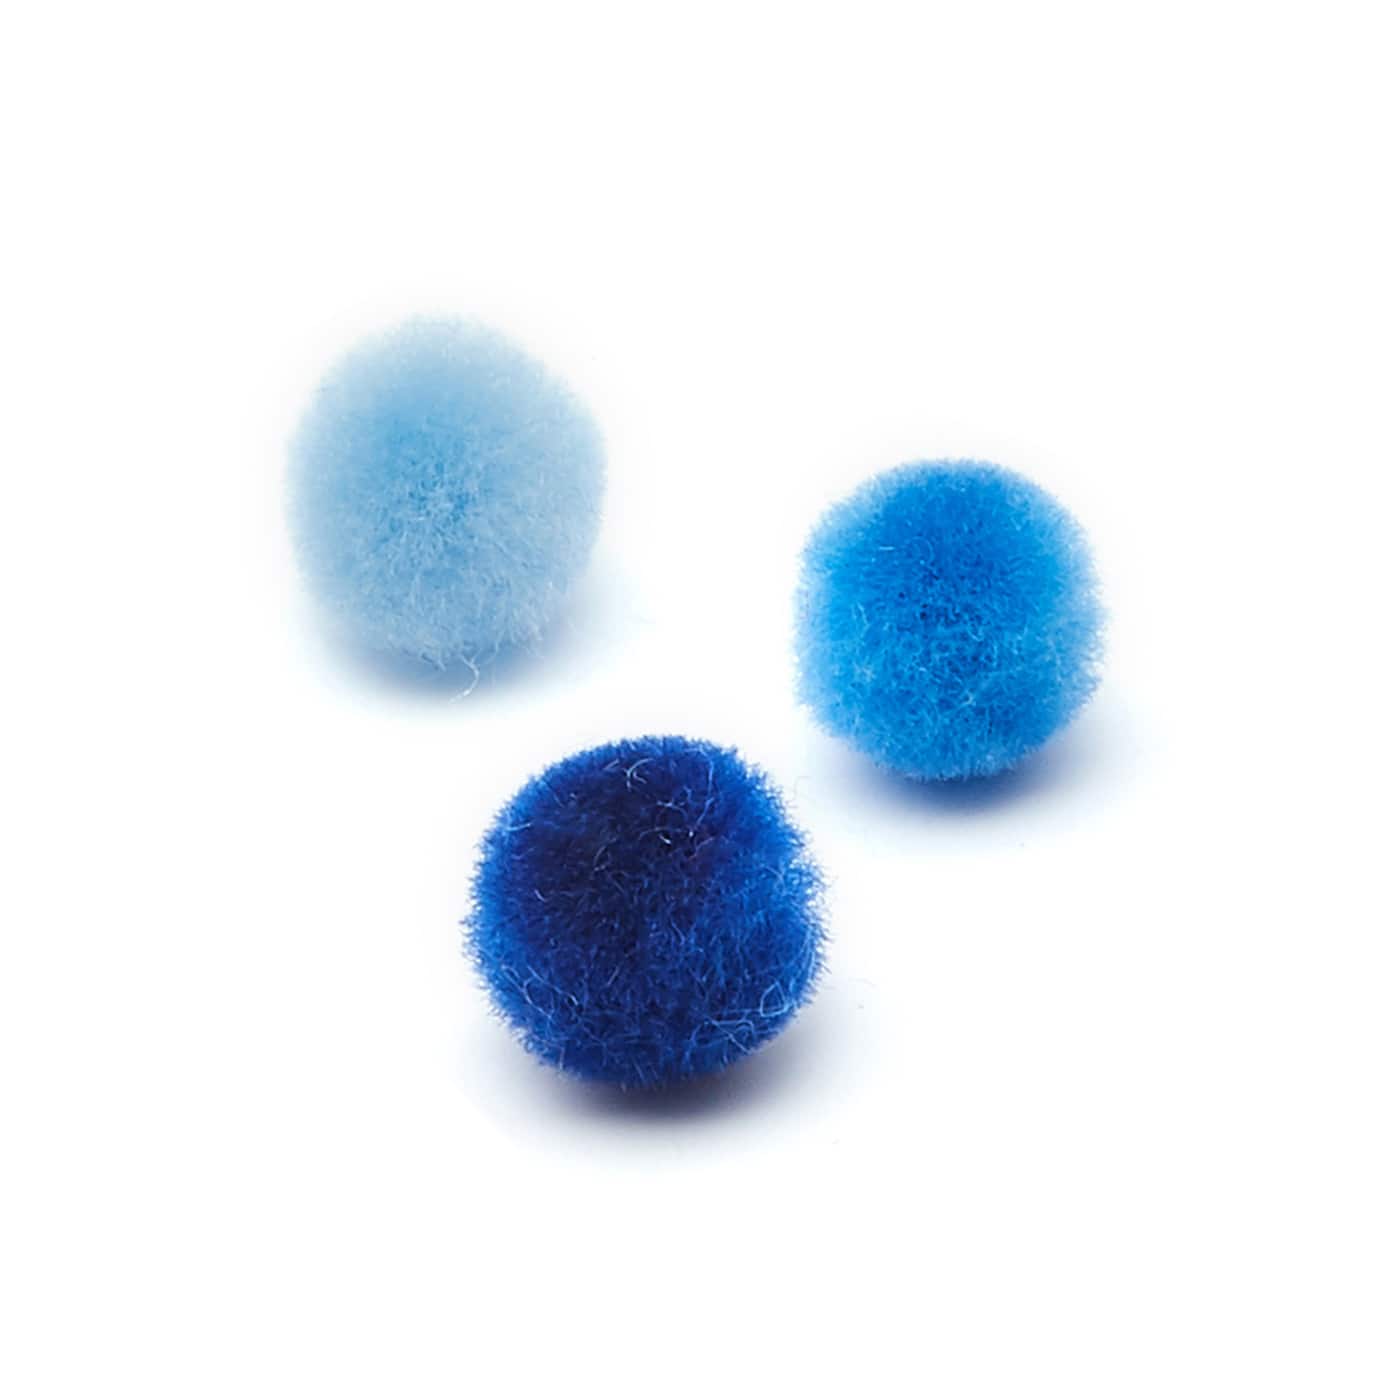 1/2" Mixed Pom Poms by Michaels